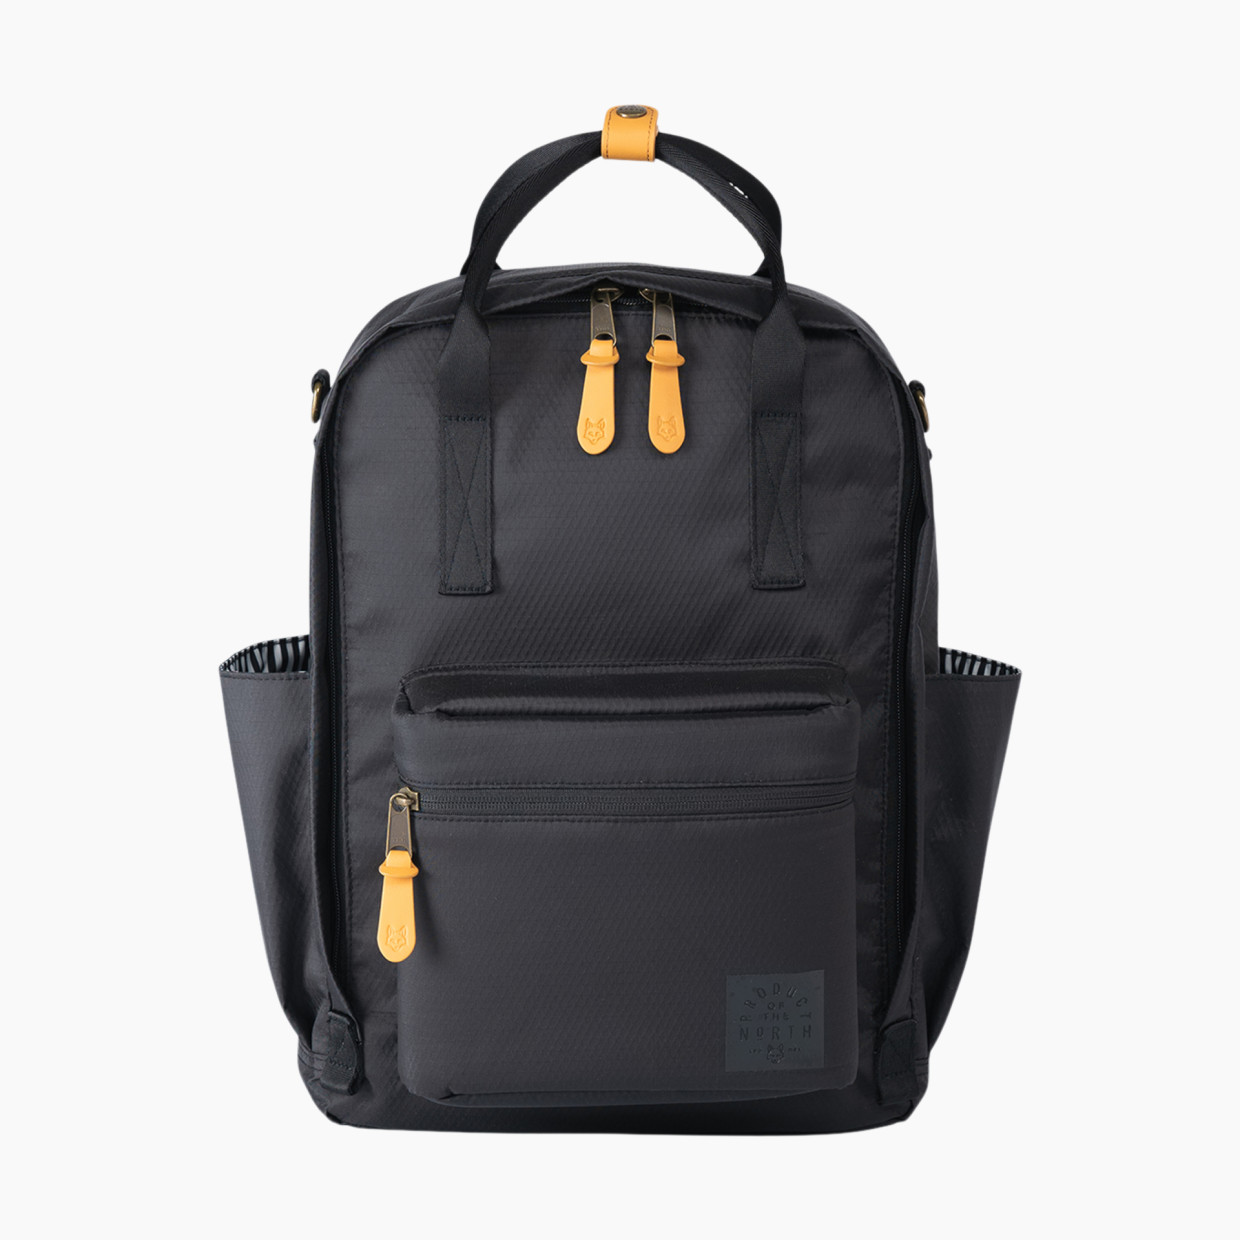 Product of the North XO Sustainable Elkin Diaper Bag Backpack - Black.